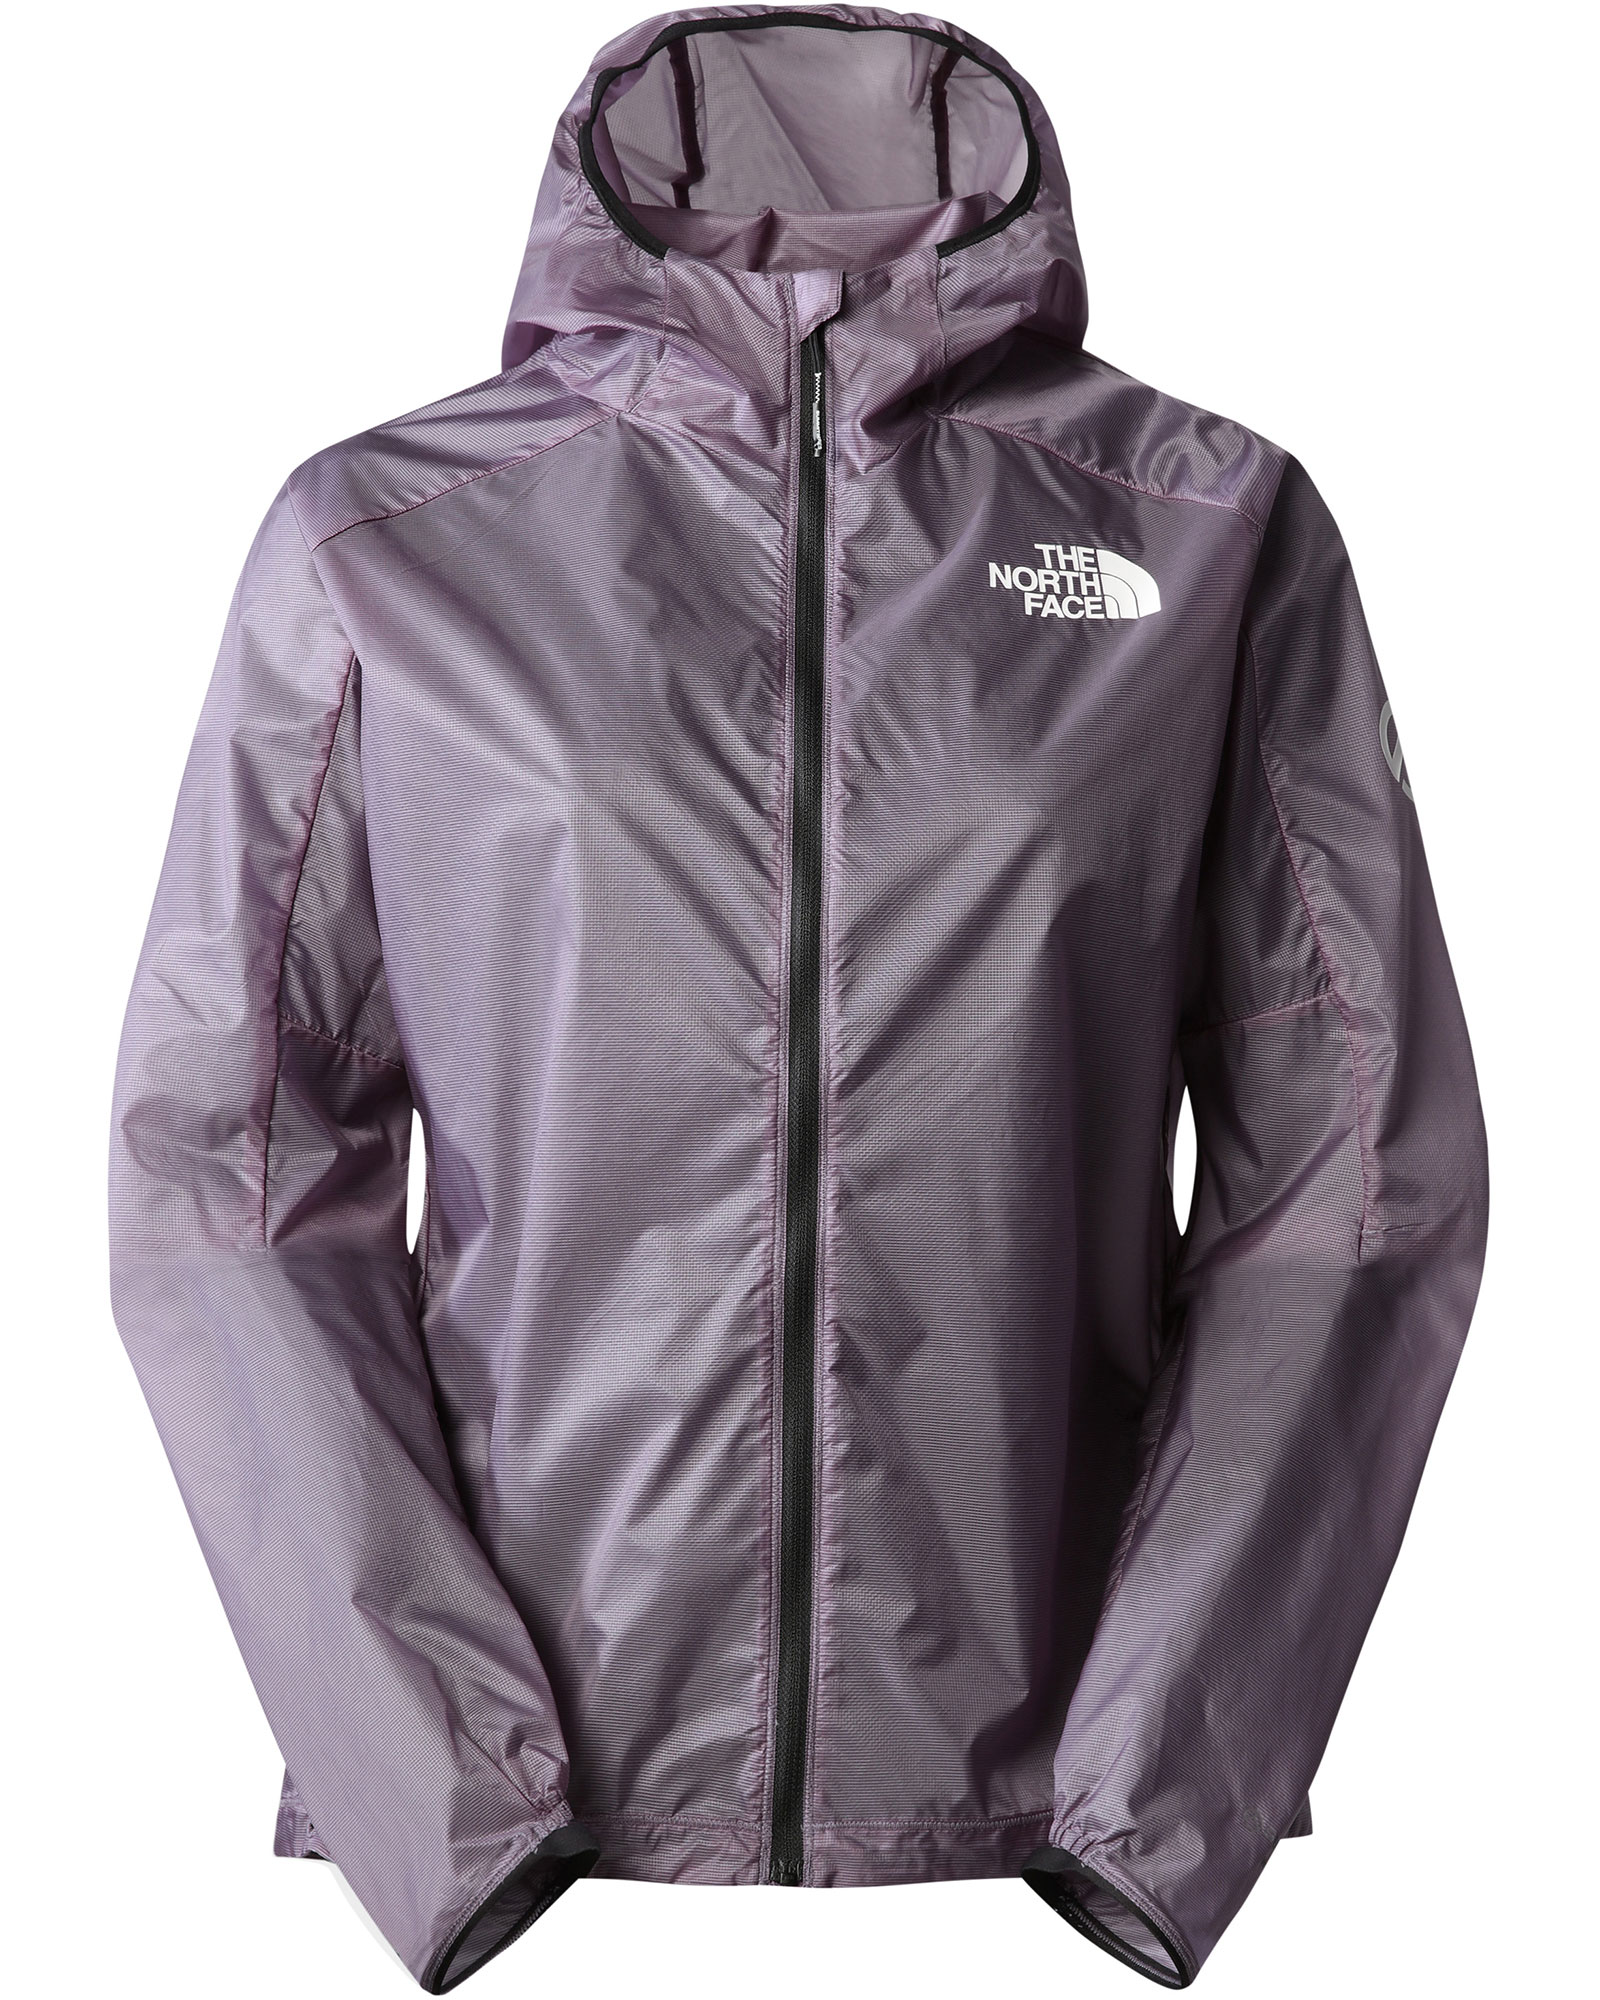 The North Face Women’s Summit Superior Wind Jacket - Lunar Slate S